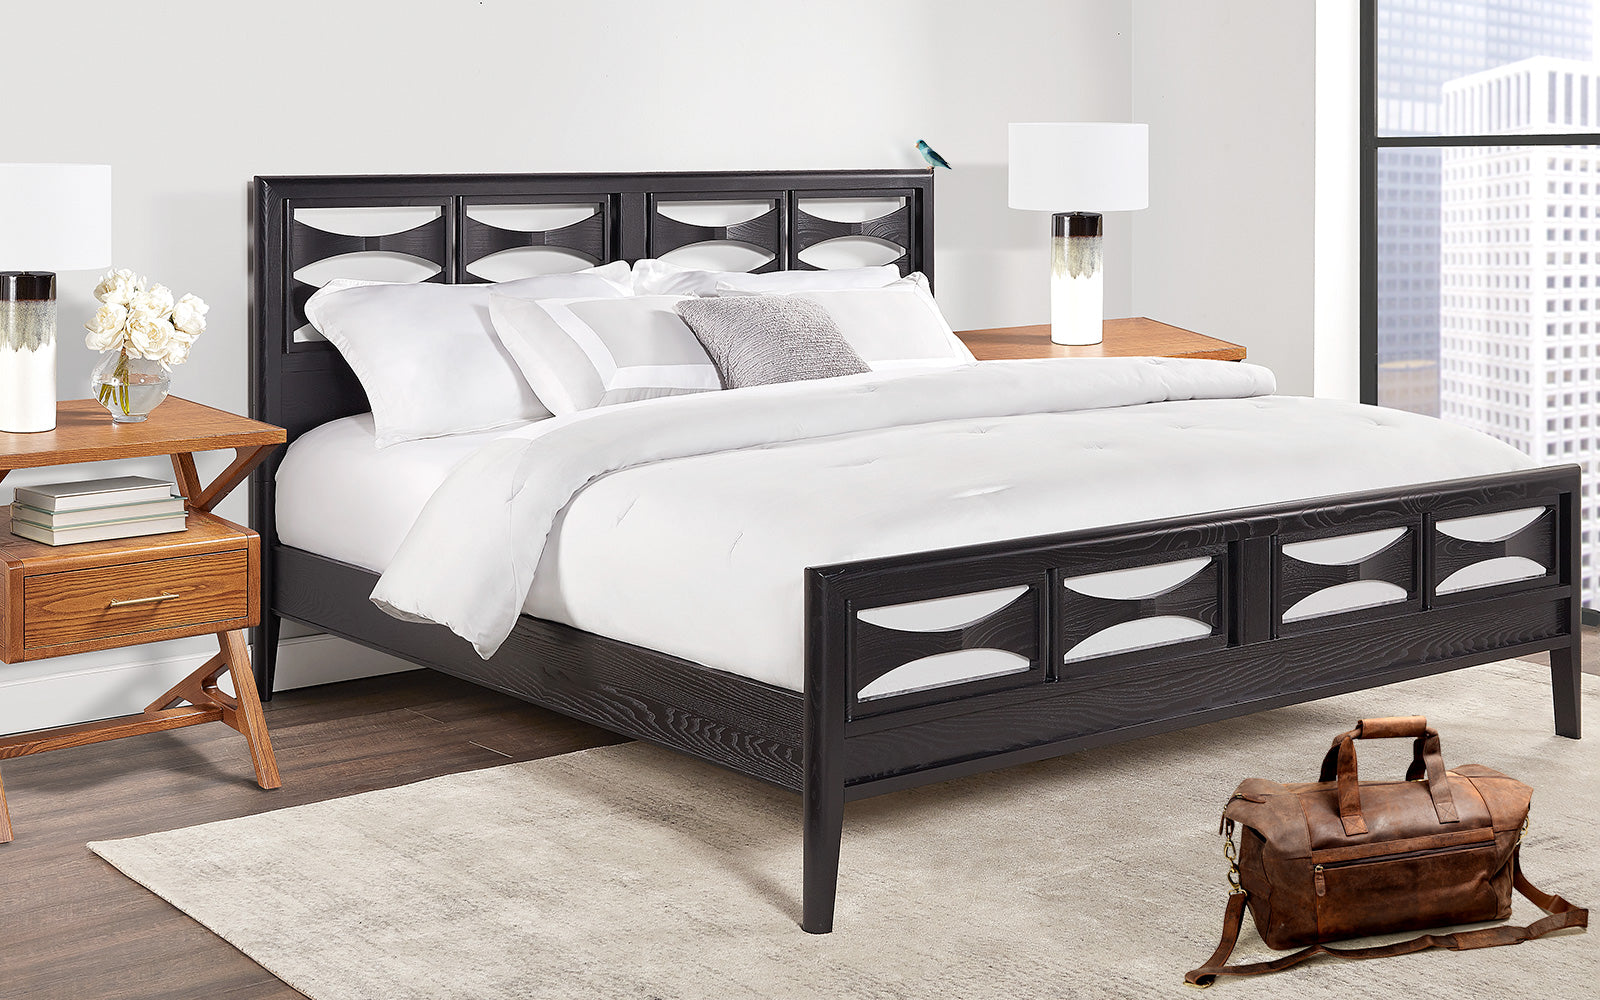 JUPITER 30 bed Handcrafted king and queen platform bed for a lifetime. Solid Ash frame construction with a commercial grade Ebony lacquered finish. Modern furniture with a splash of retro. 